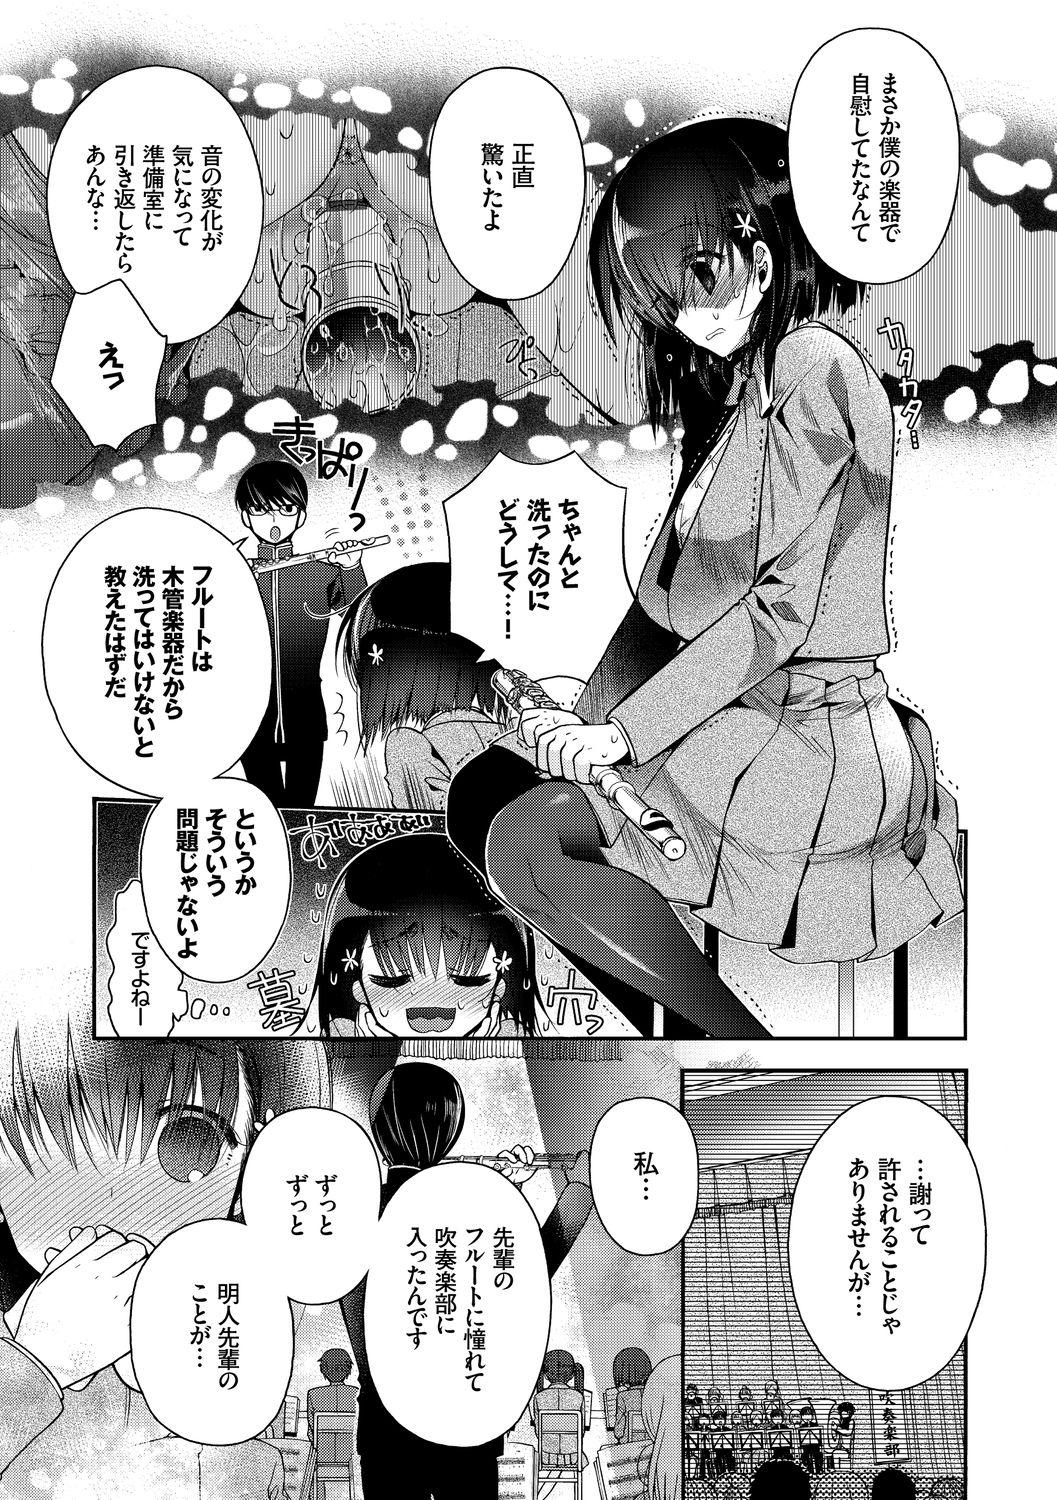 Hatsukoi Melty - Melty First Love 6